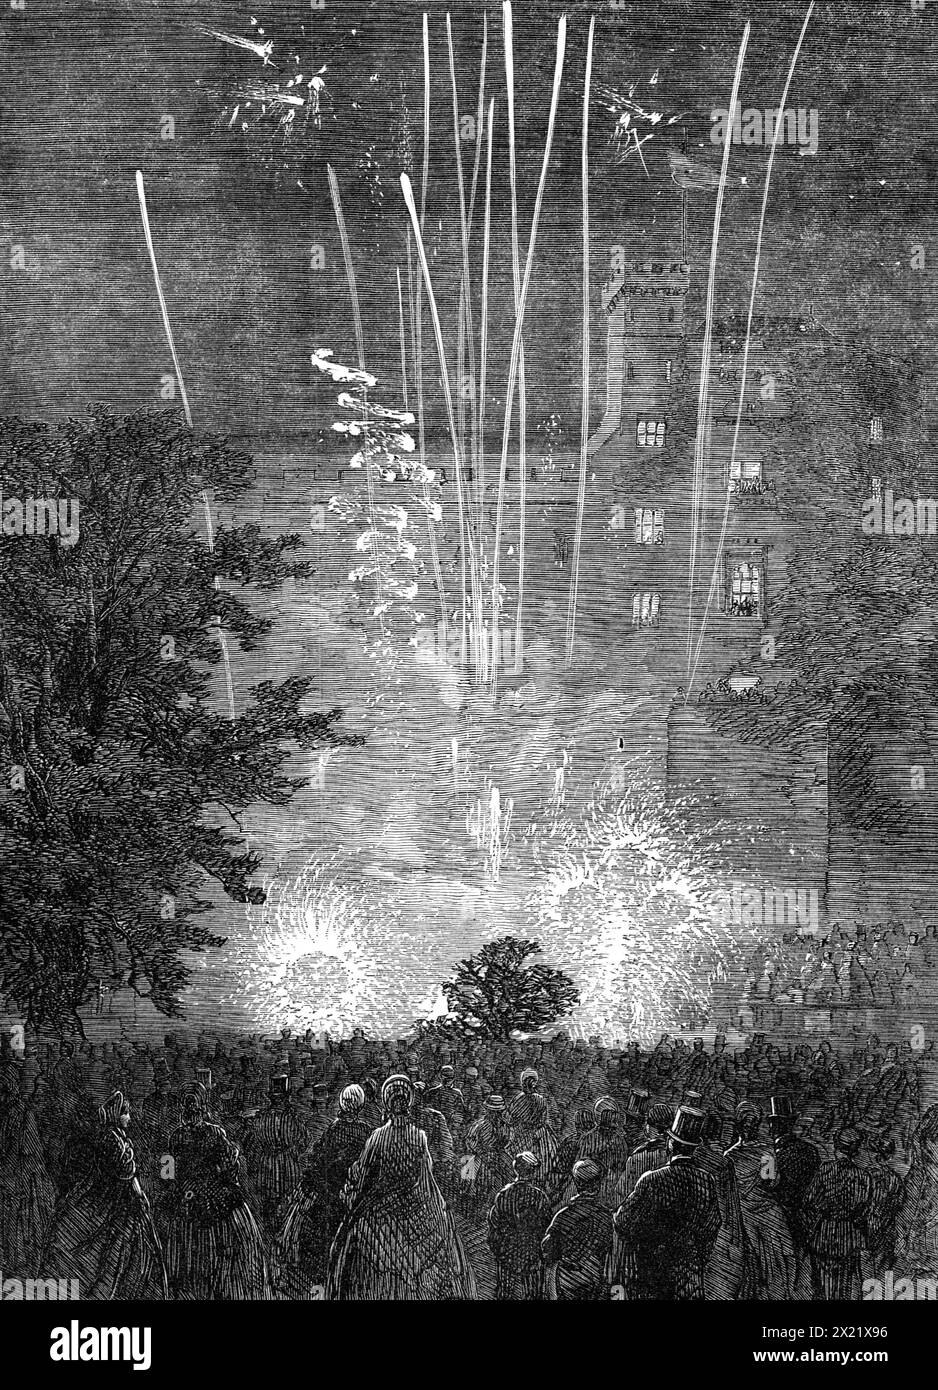 Festivities at Kilkenny Castle [in Ireland] on the Coming of Age of the Marquis of Ormonde, 1865. To celebrate '...the young Lord's twenty-first birthday...there was a grand display of fireworks on the castle-lawn...by arrangement of a committee of the citizens. It was supplied by Mr. J. Lawrence, of Dublin, and consisted of various water-rockets, fire-fountains, and other devices; also a beautiful horizontal wheel, discharging coloured stars in every direction, which was floated on a raft in the river, with wonderful effect. The aerial fireworks included rockets of every possible description, Stock Photo